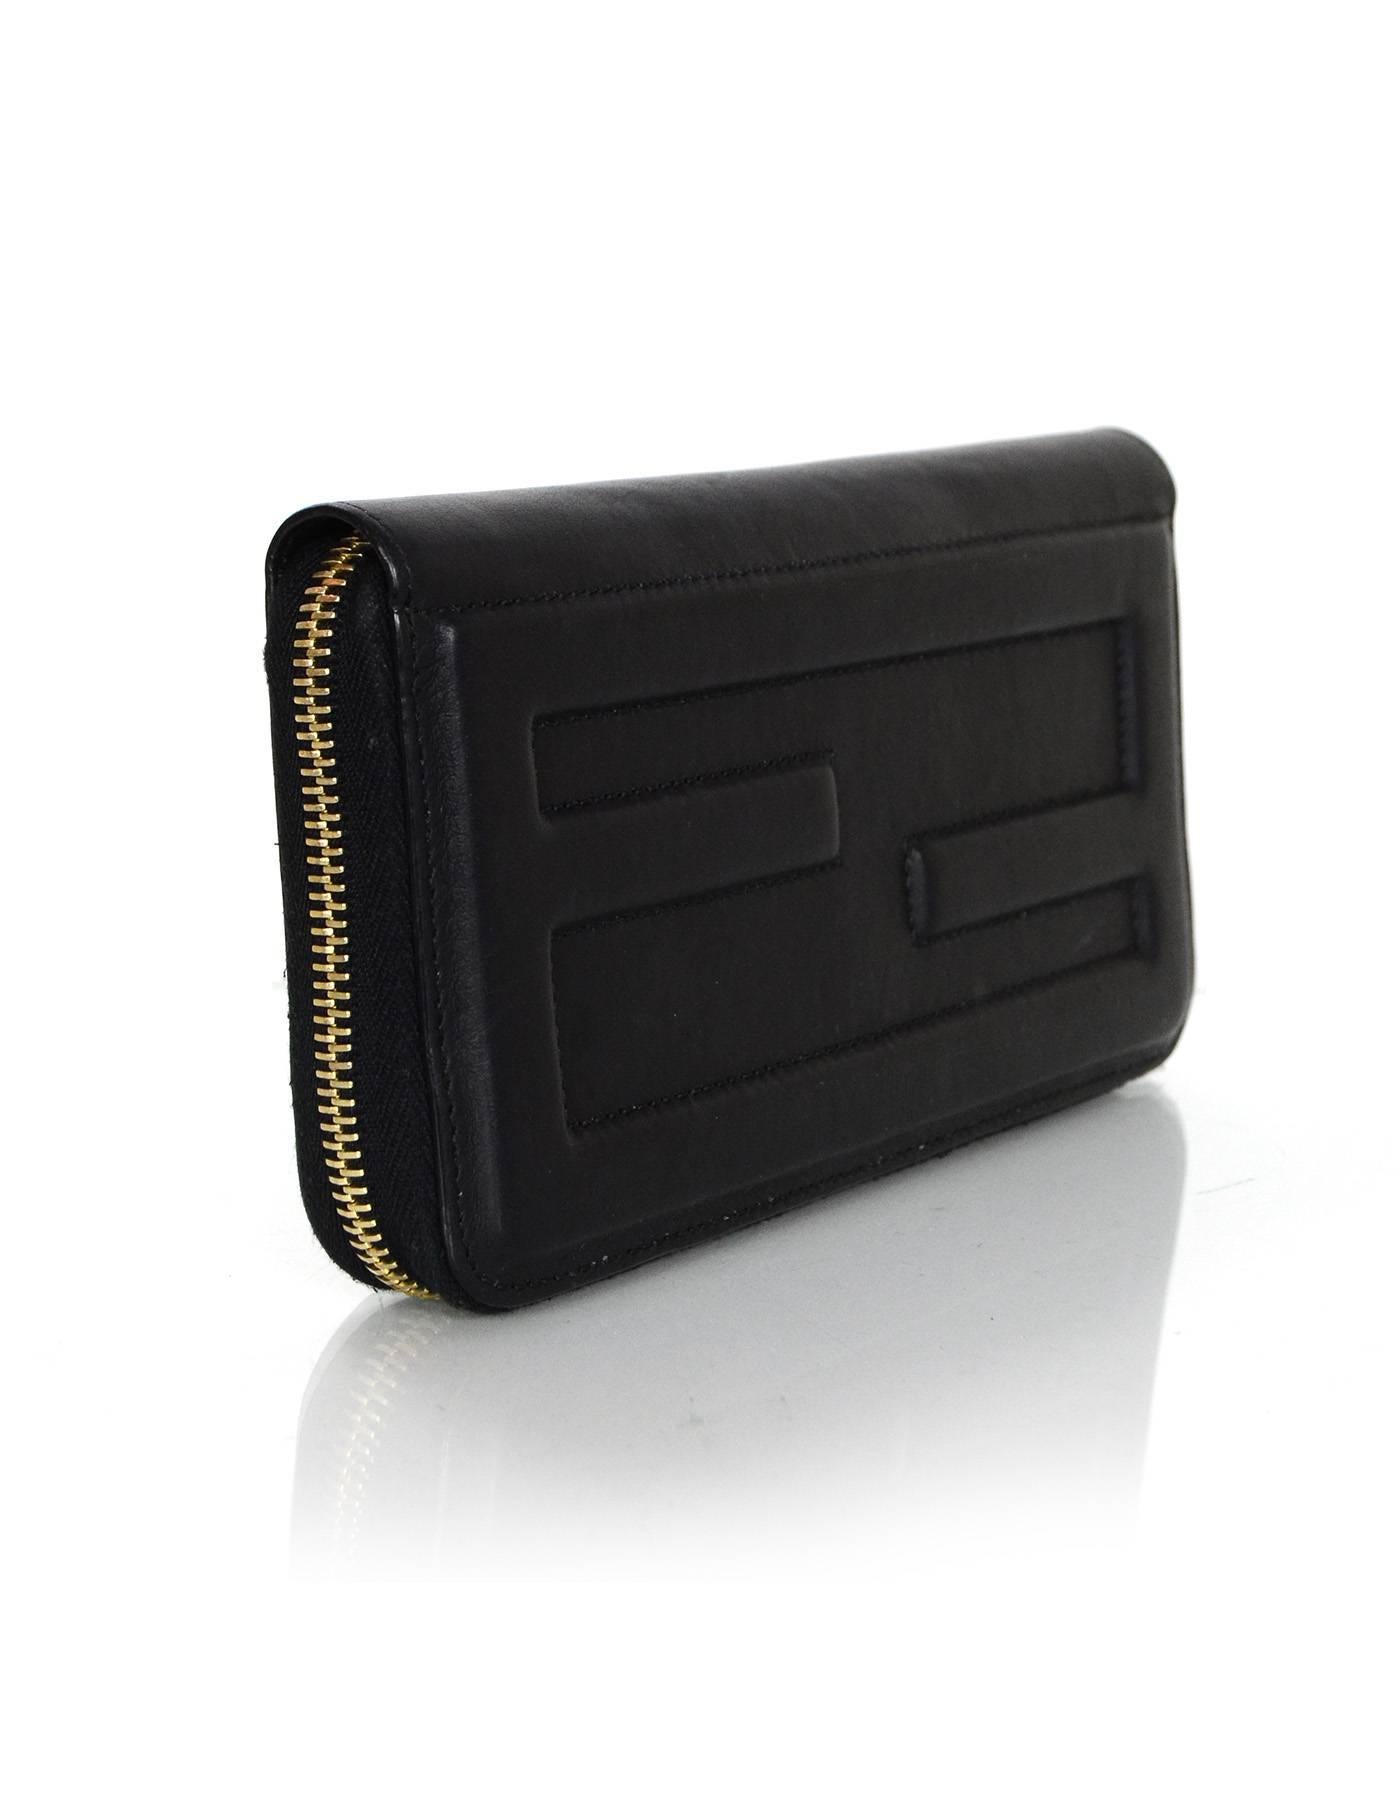 Fendi 2016 Black Leather Logo Zip Around Wallet GHW rt $650 In Excellent Condition In New York, NY